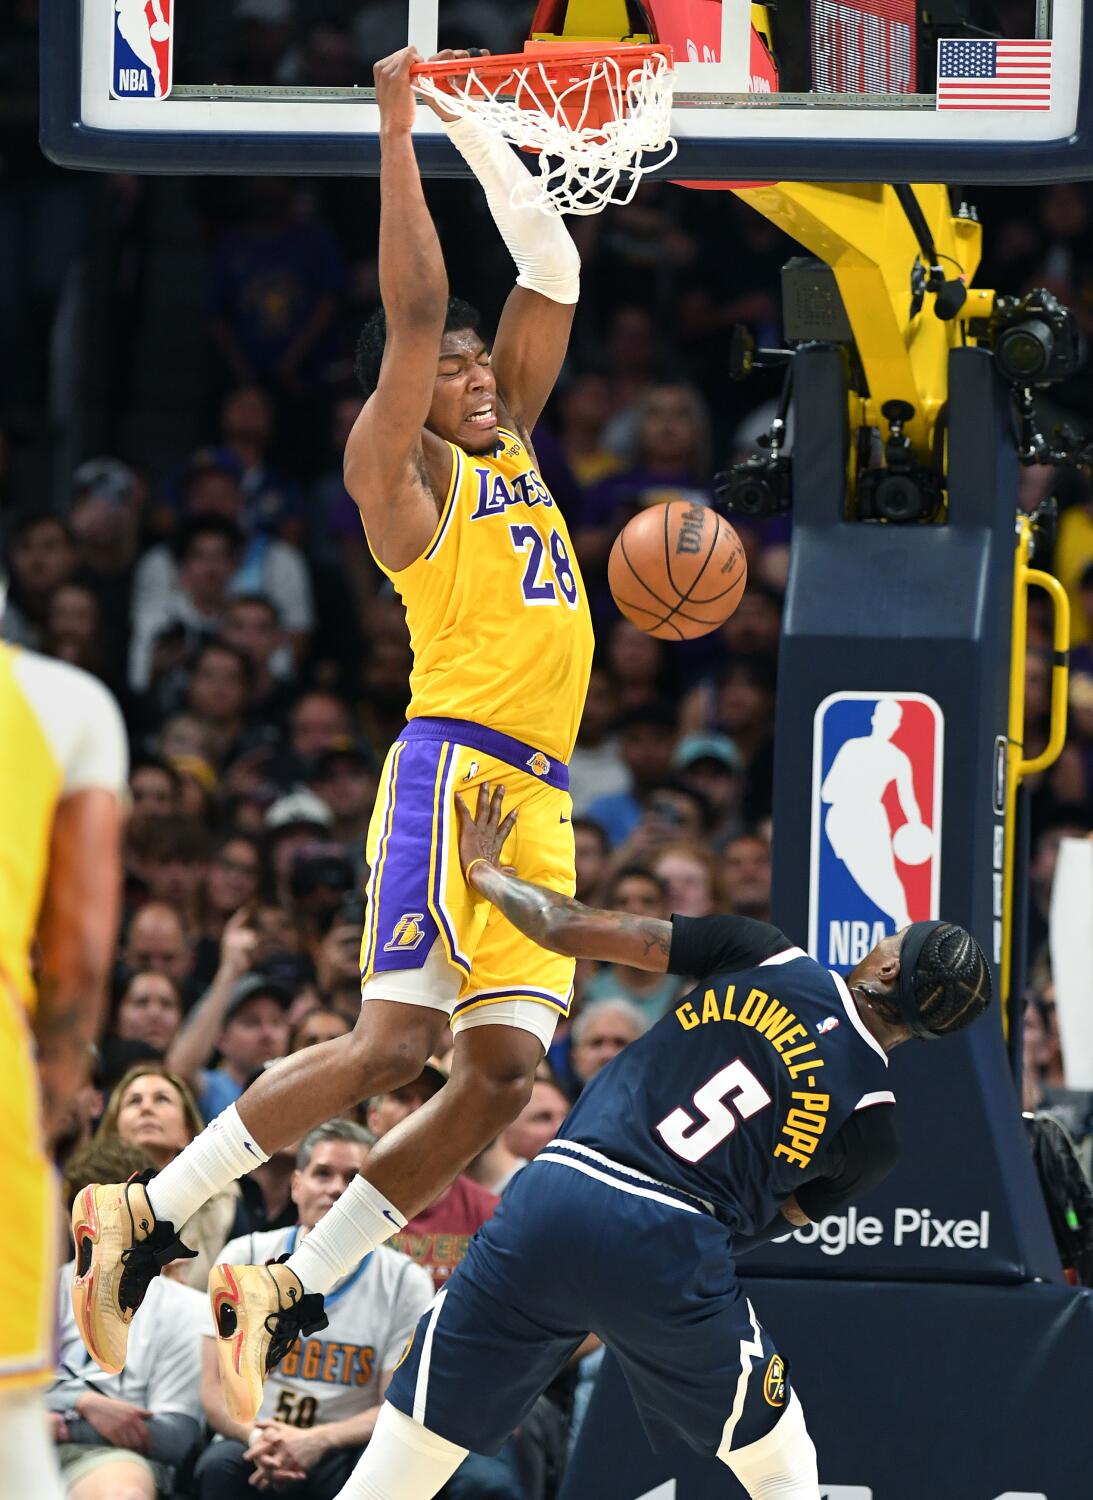 Injured Rui Hachimura can't help Lakers. But watch him save Earth on Japanese anime show